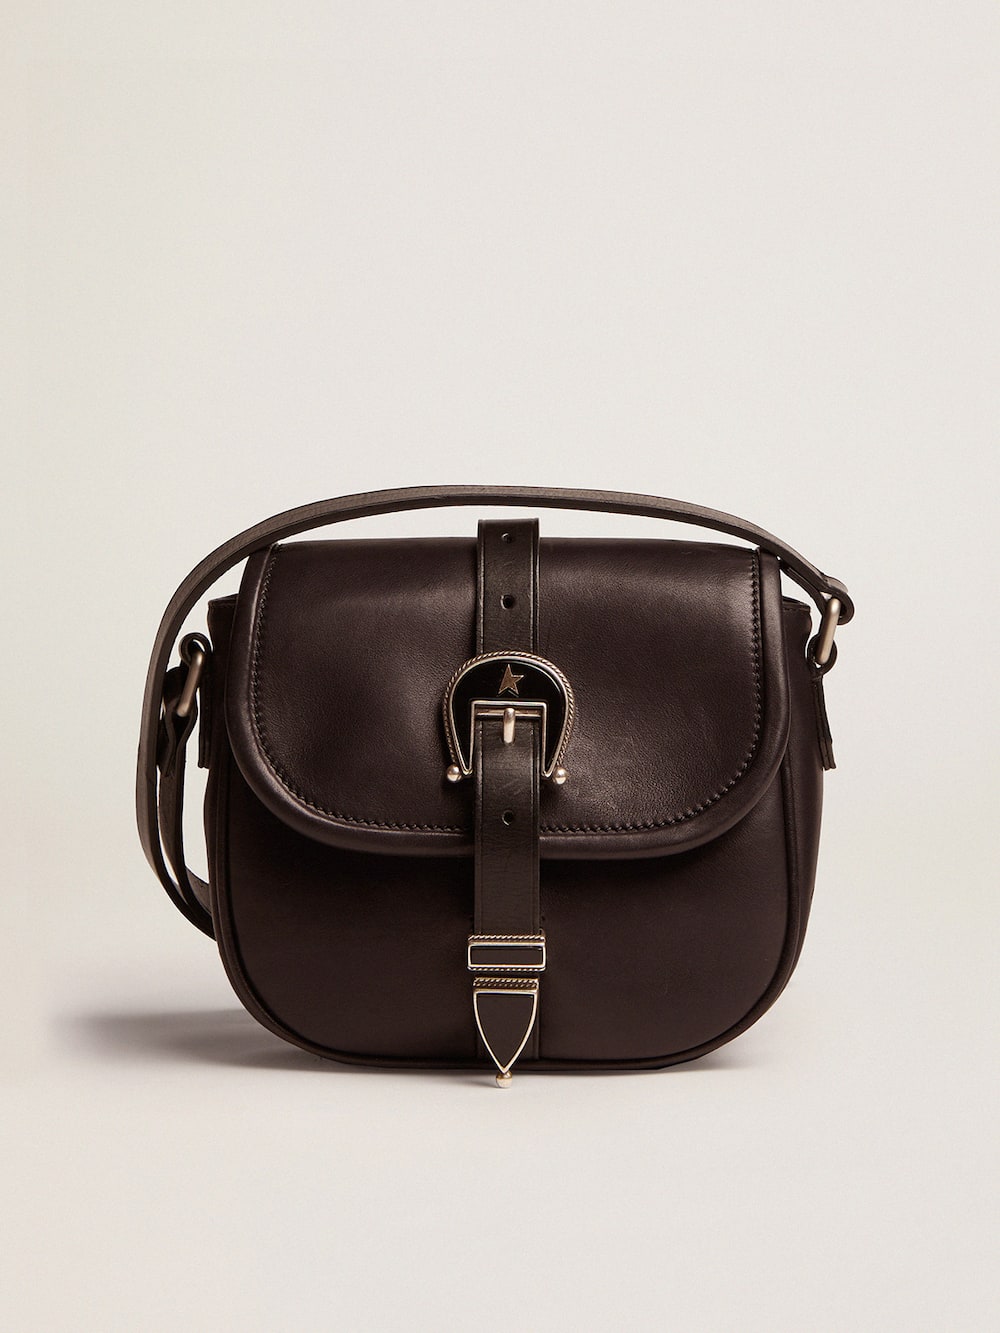 Golden Goose - Women's small Rodeo Bag in black leather in 